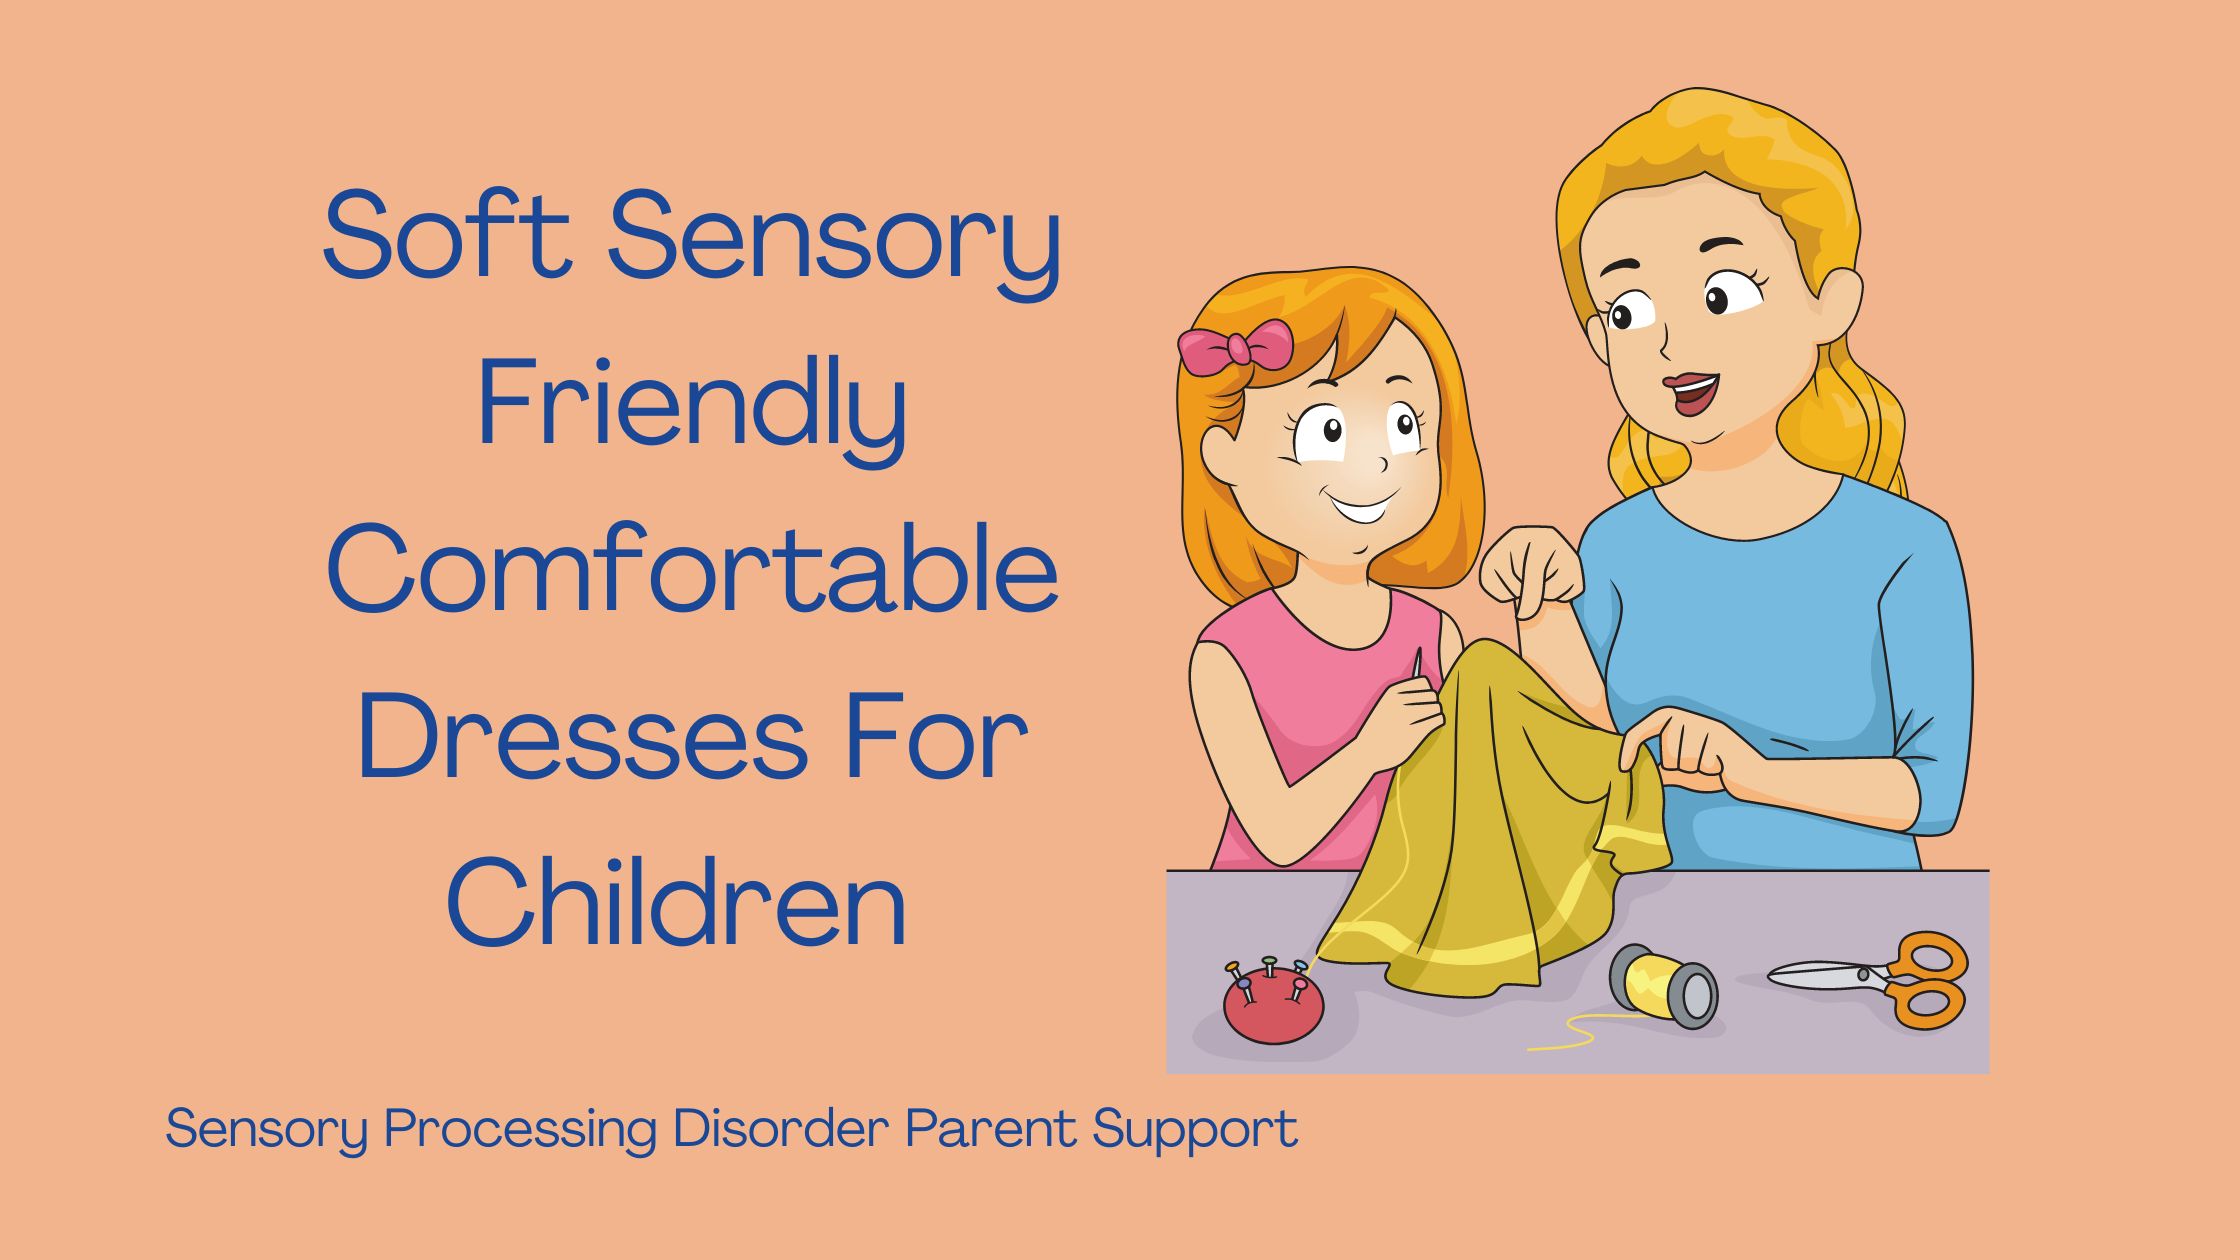 mom and daughter wearing sensory friendly dresses and sewing and making sensory dresses Soft Sensory Friendly Comfortable Dresses For Children